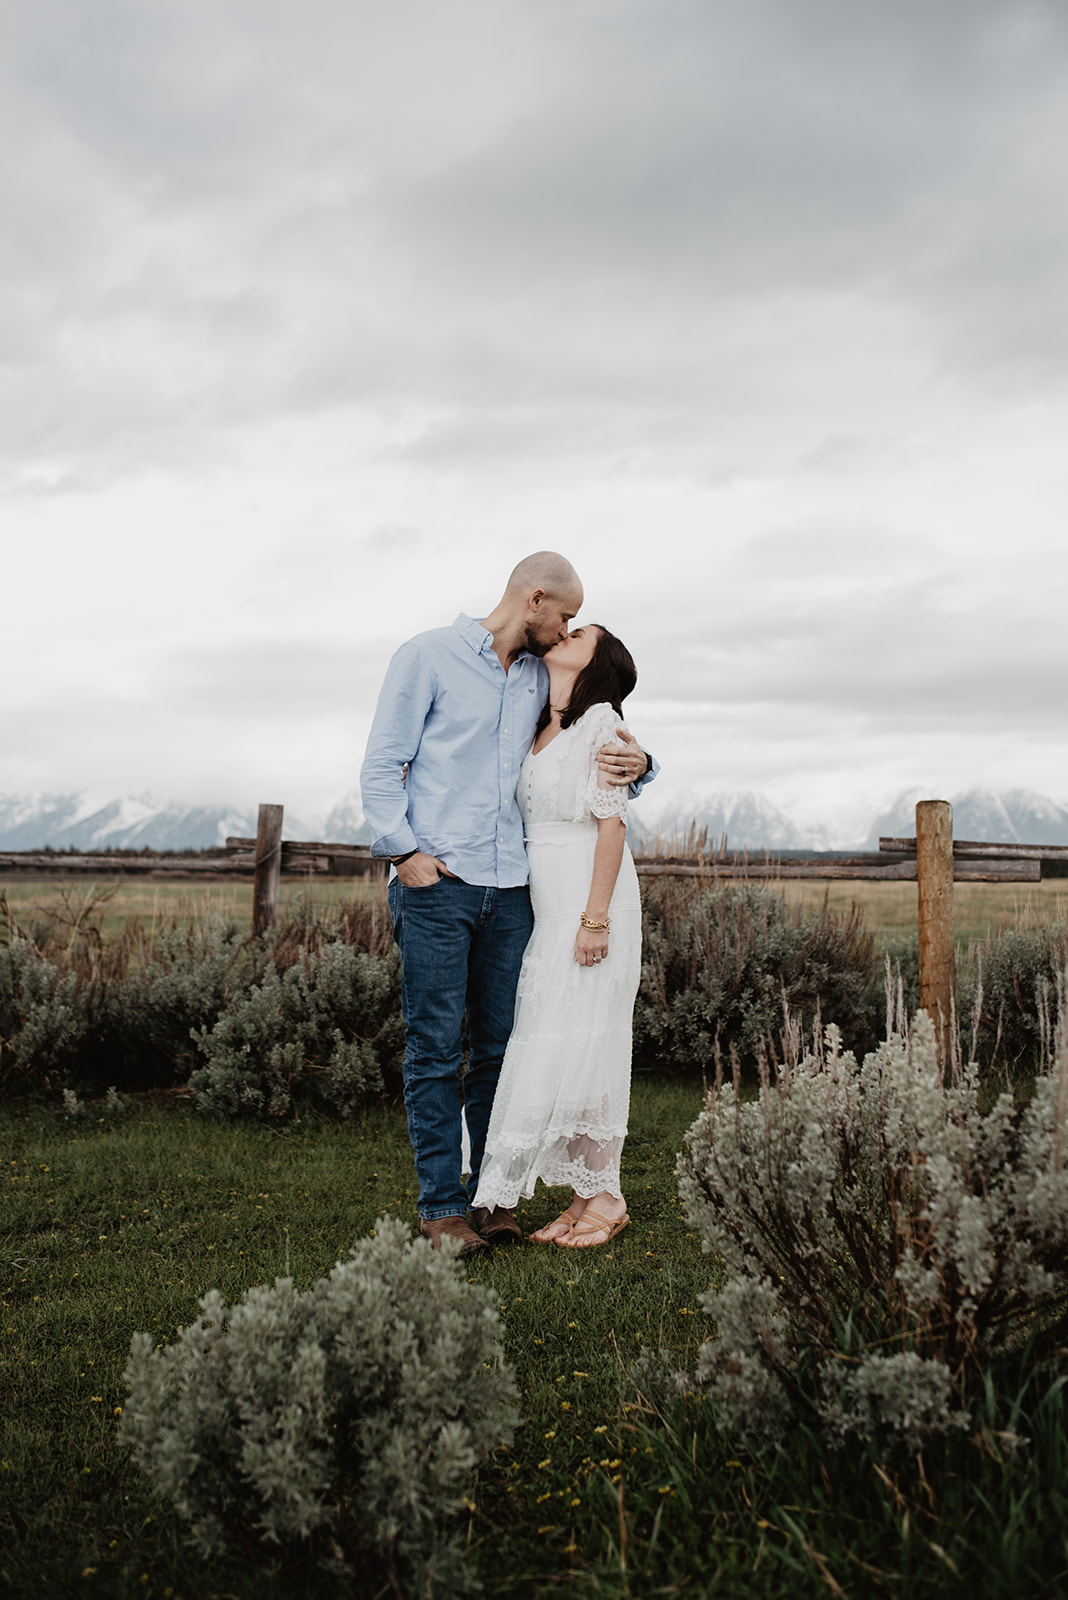 rainy day photos in the Tetons with husband and wife taking anniversary photos in a sage brush field with a wood fence behind them